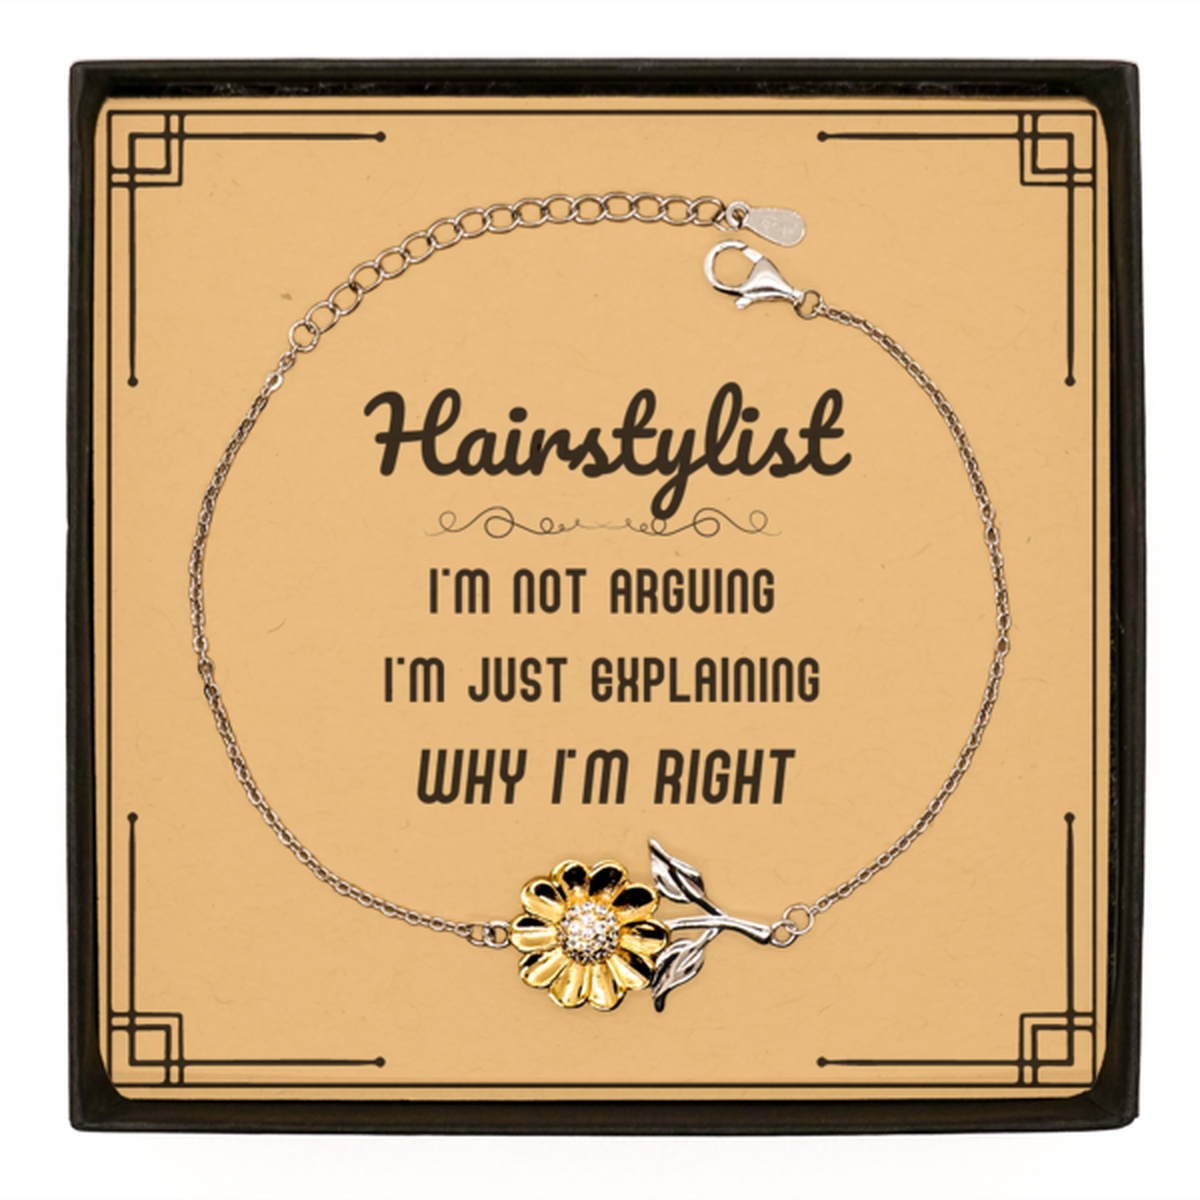 Hairstylist I'm not Arguing. I'm Just Explaining Why I'm RIGHT Sunflower Bracelet, Funny Saying Quote Hairstylist Gifts For Hairstylist Message Card Graduation Birthday Christmas Gifts for Men Women Coworker